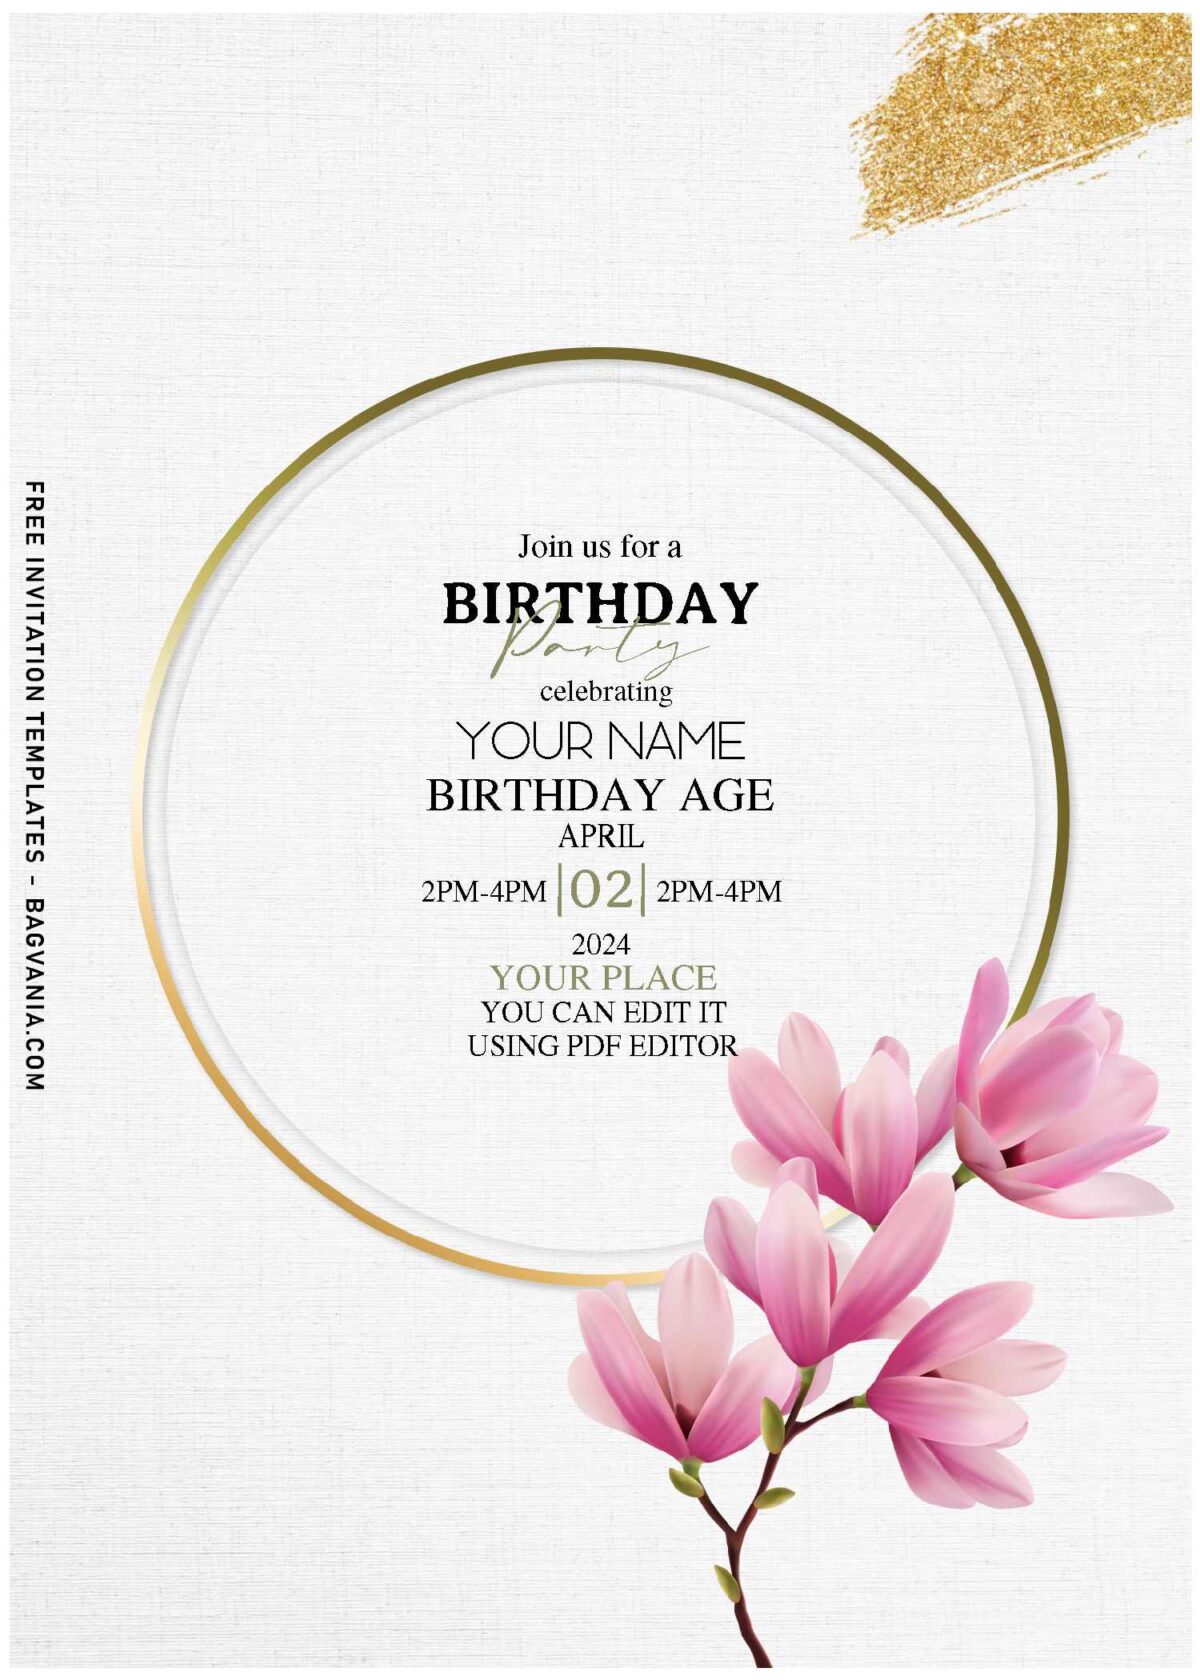 (Free Editable PDF) Enchanting Floral Frame Birthday Invitation Templates with watercolor magnolia